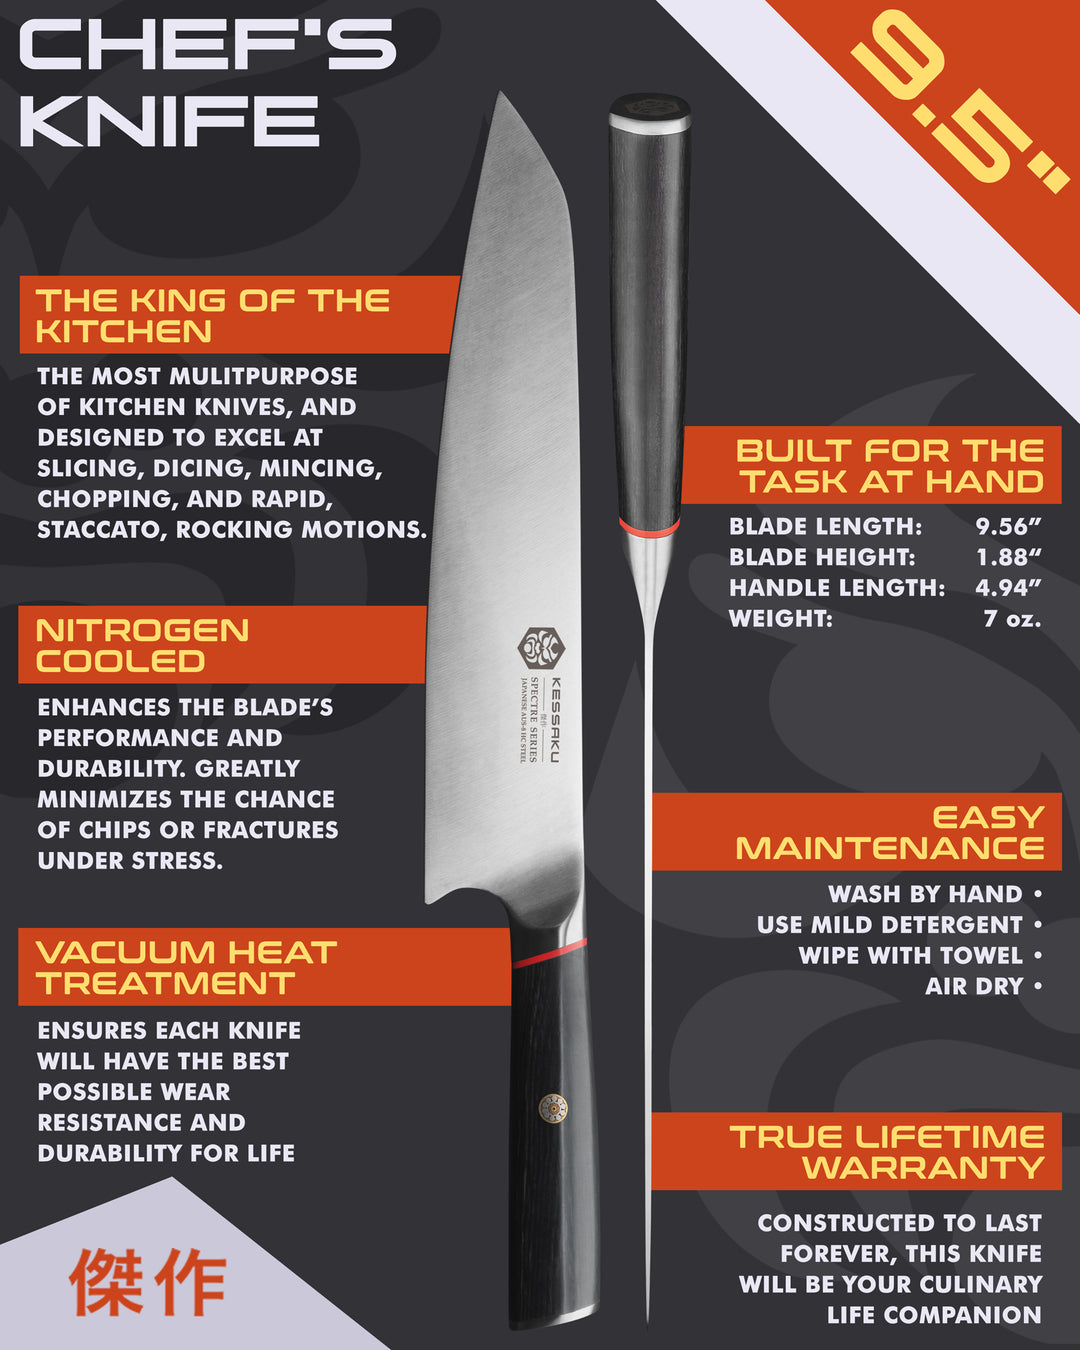 Kessaku Spectre 9.5-In. Chef's Knife uses, dimensions, maintenance, warranty info, and additional blade treatments